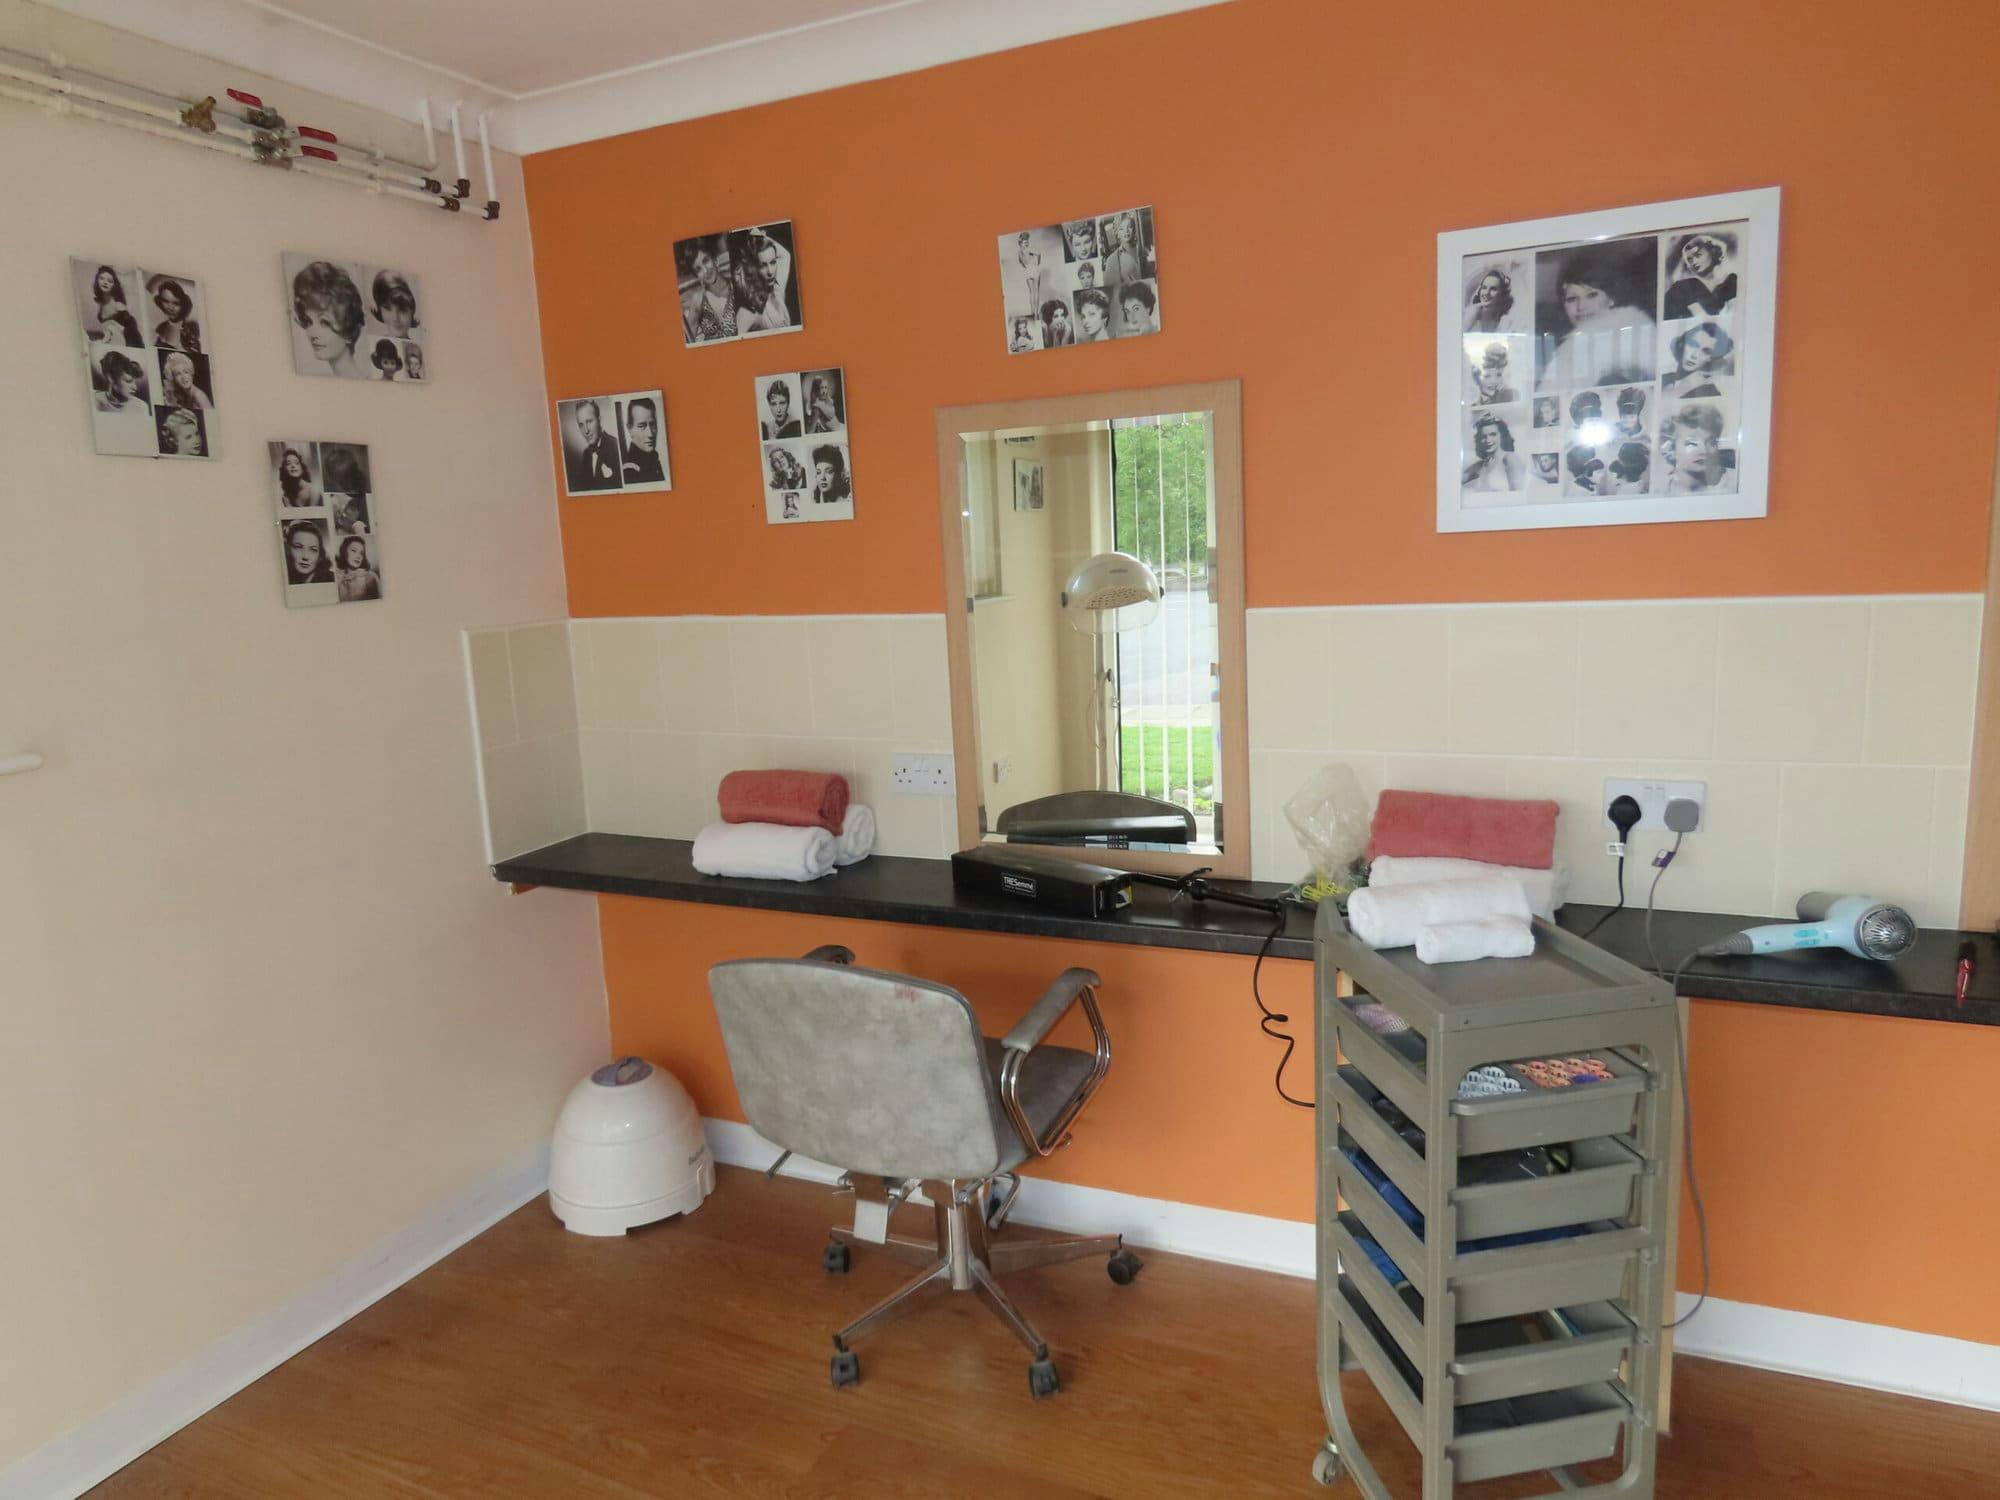 Salon at Knowles Court Care Home, Bradford, West Yorkshire